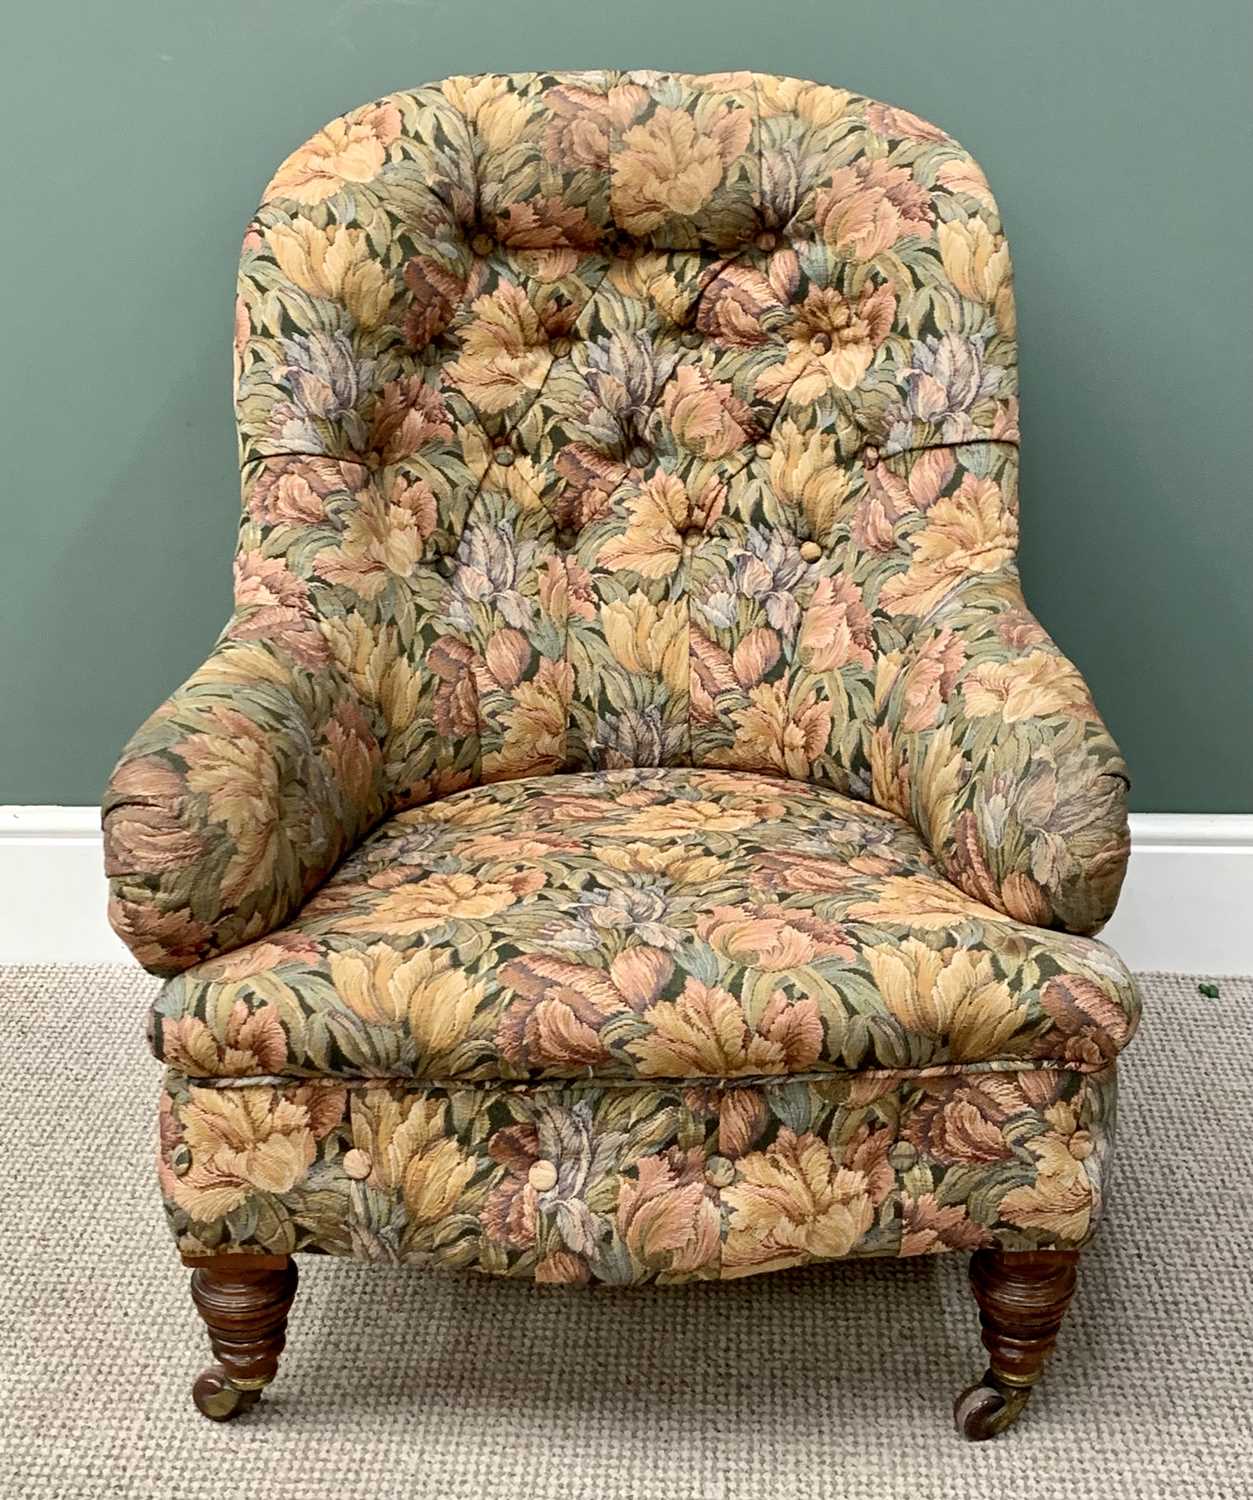 EDWARDIAN BUTTON BACK UPHOLSTERED TUB ARMCHAIR in floral upholstery, on turned front supports and - Image 2 of 3